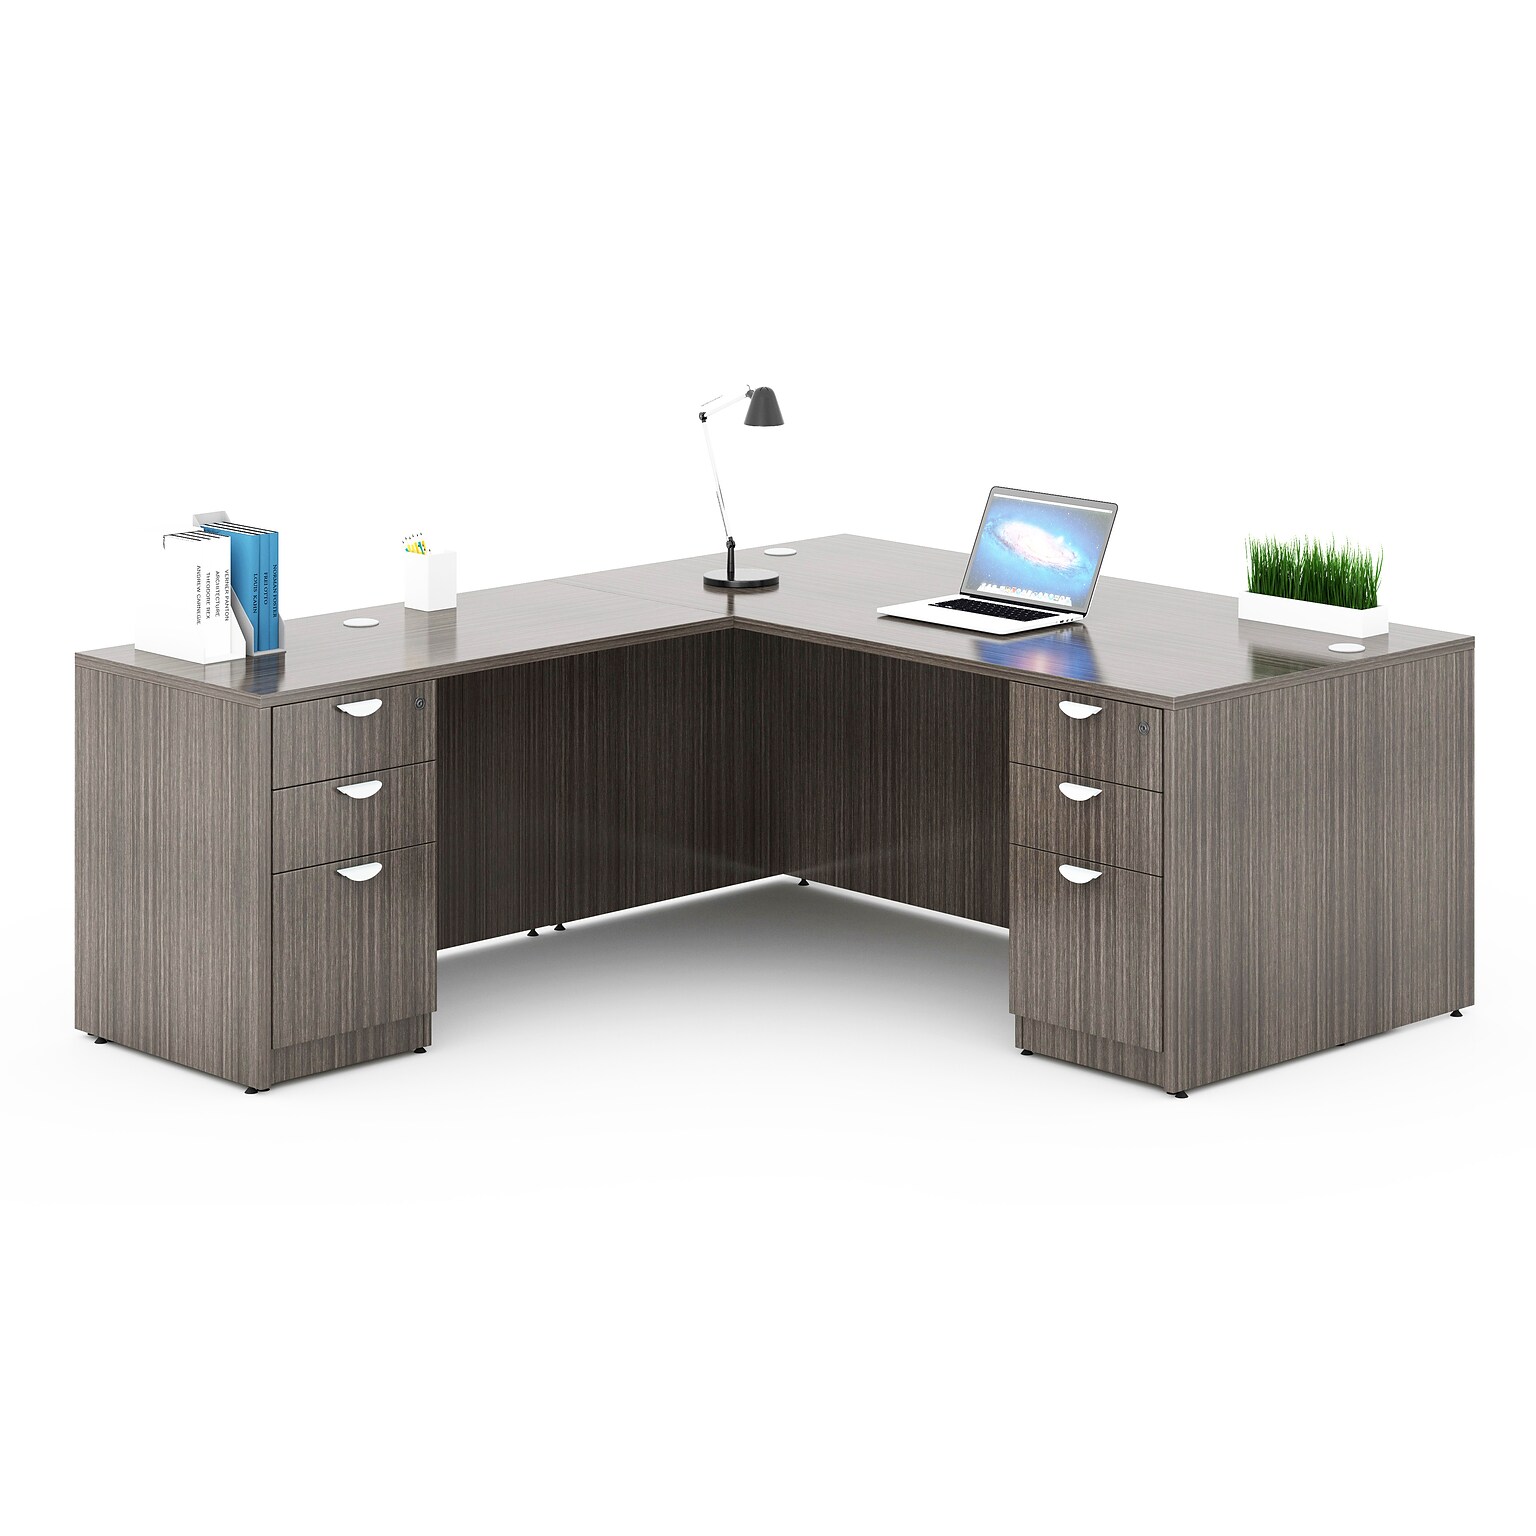 Boss Office Products 71 Executive L-Shape Corner Desk with Dual File Storage Pedestals, Driftwood (GROUPA11-DW)